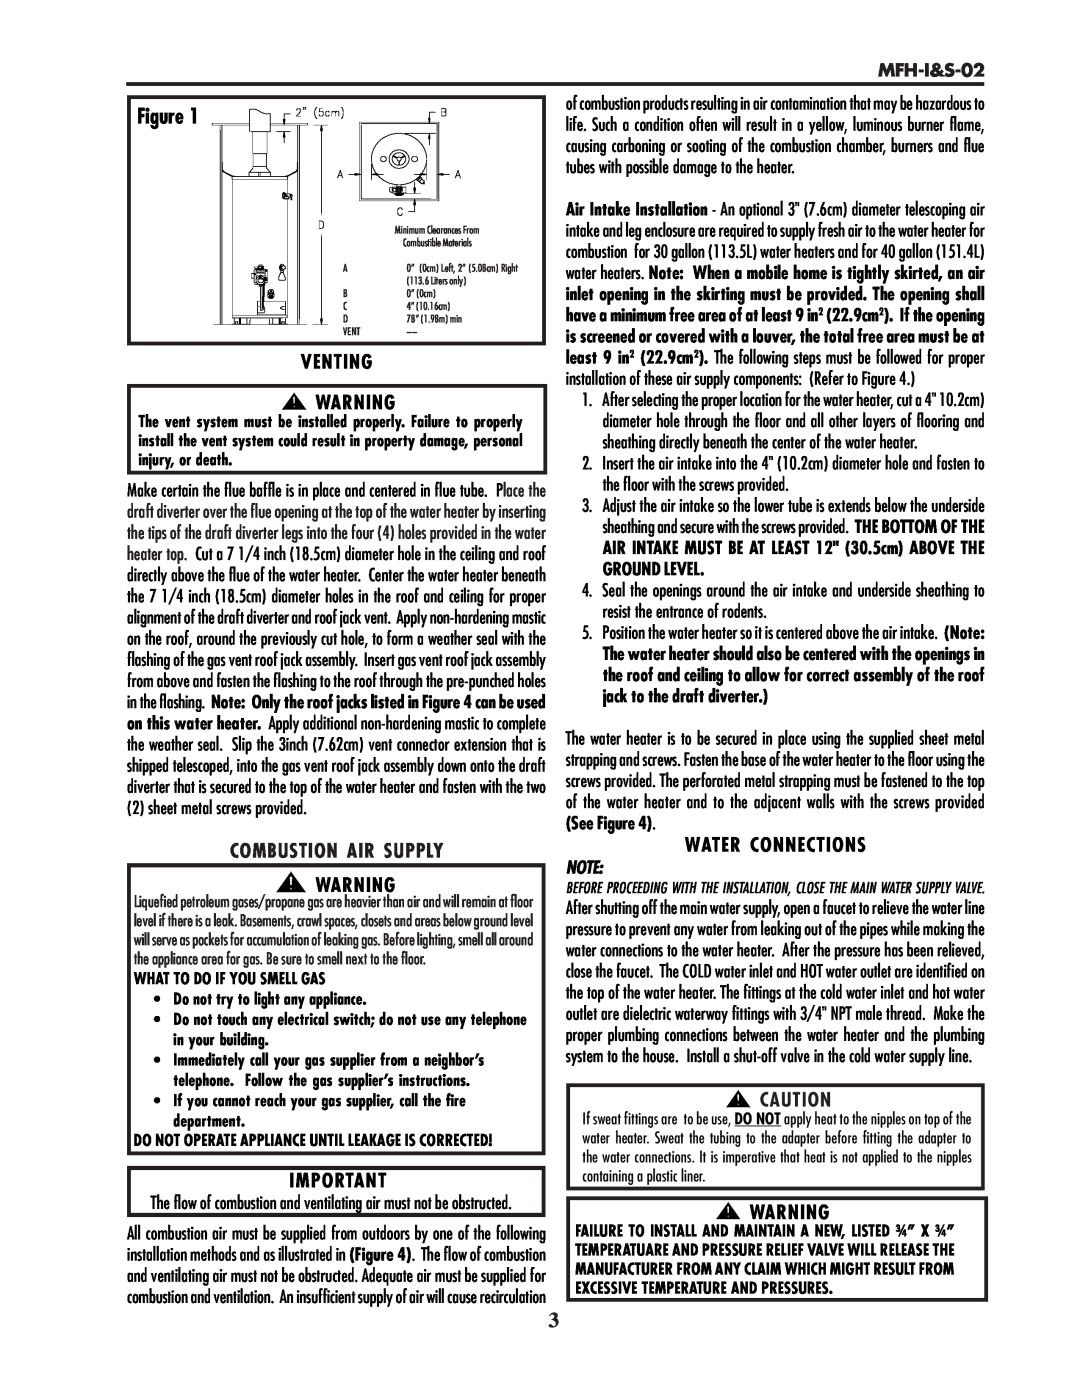 Lochinvar MFH-I&S-02 service manual Venting, Combustion Air Supply, Water Connections 